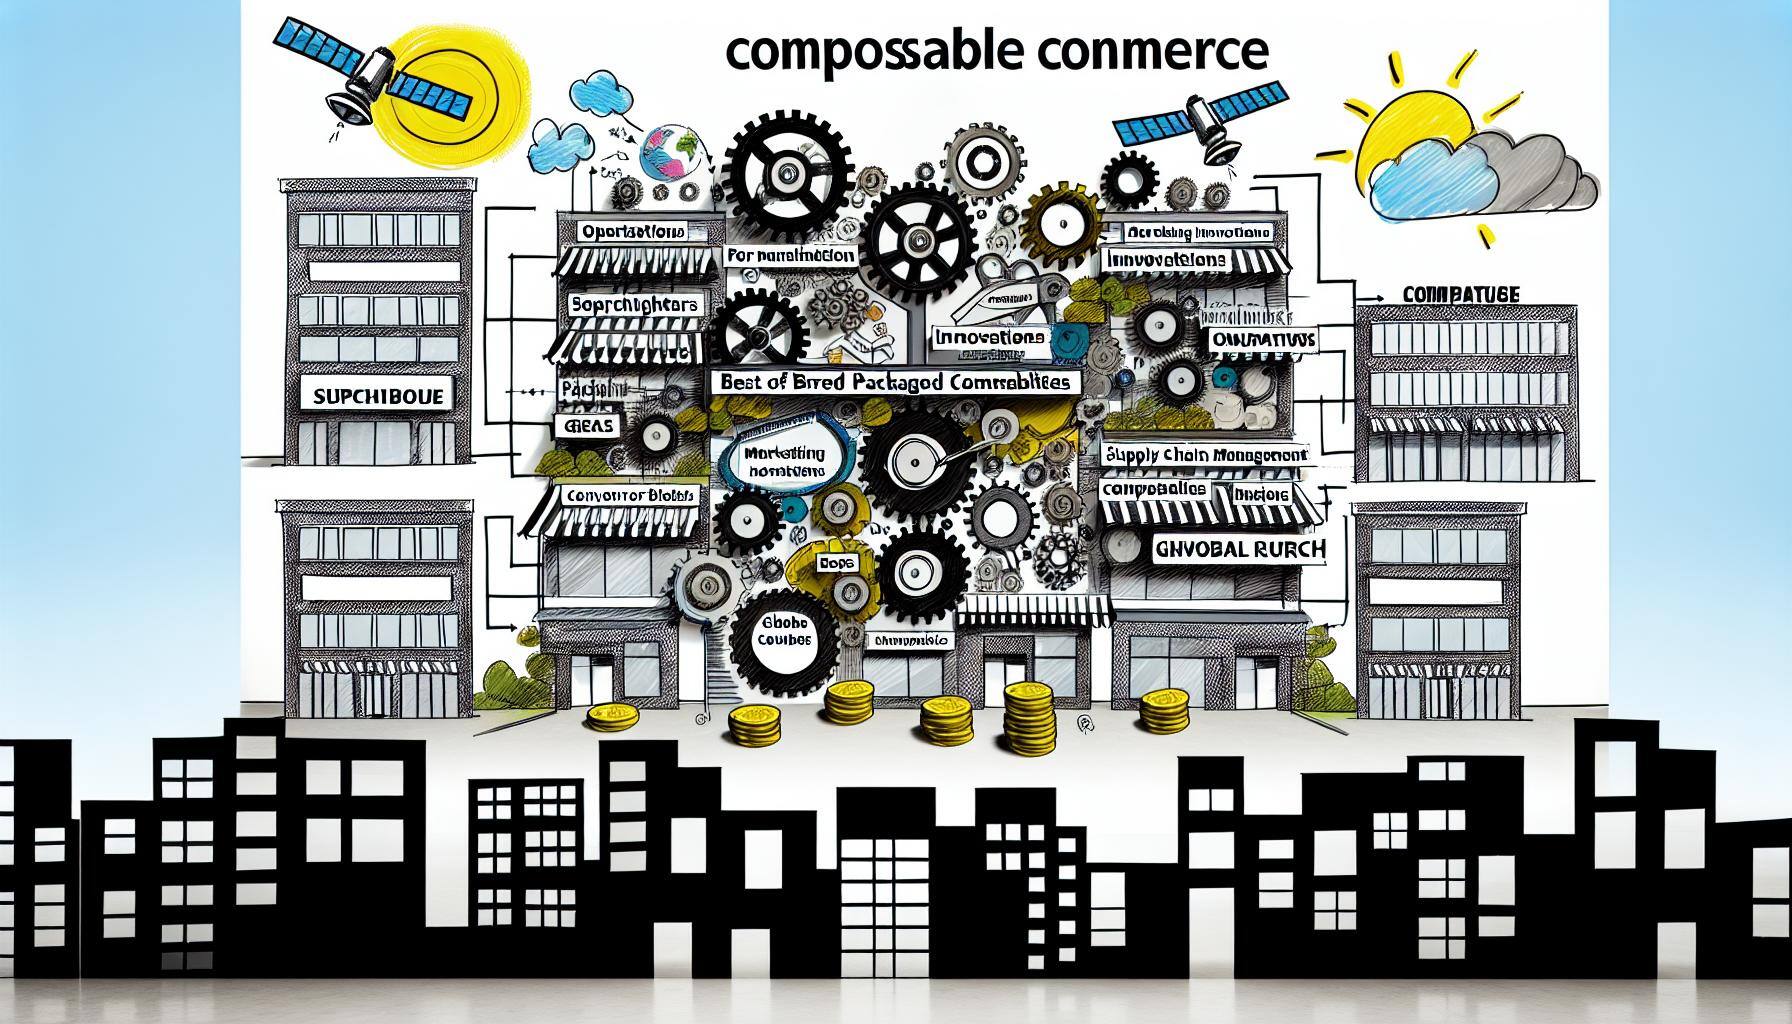 Composable commerce with best of breed packaged business capabilities